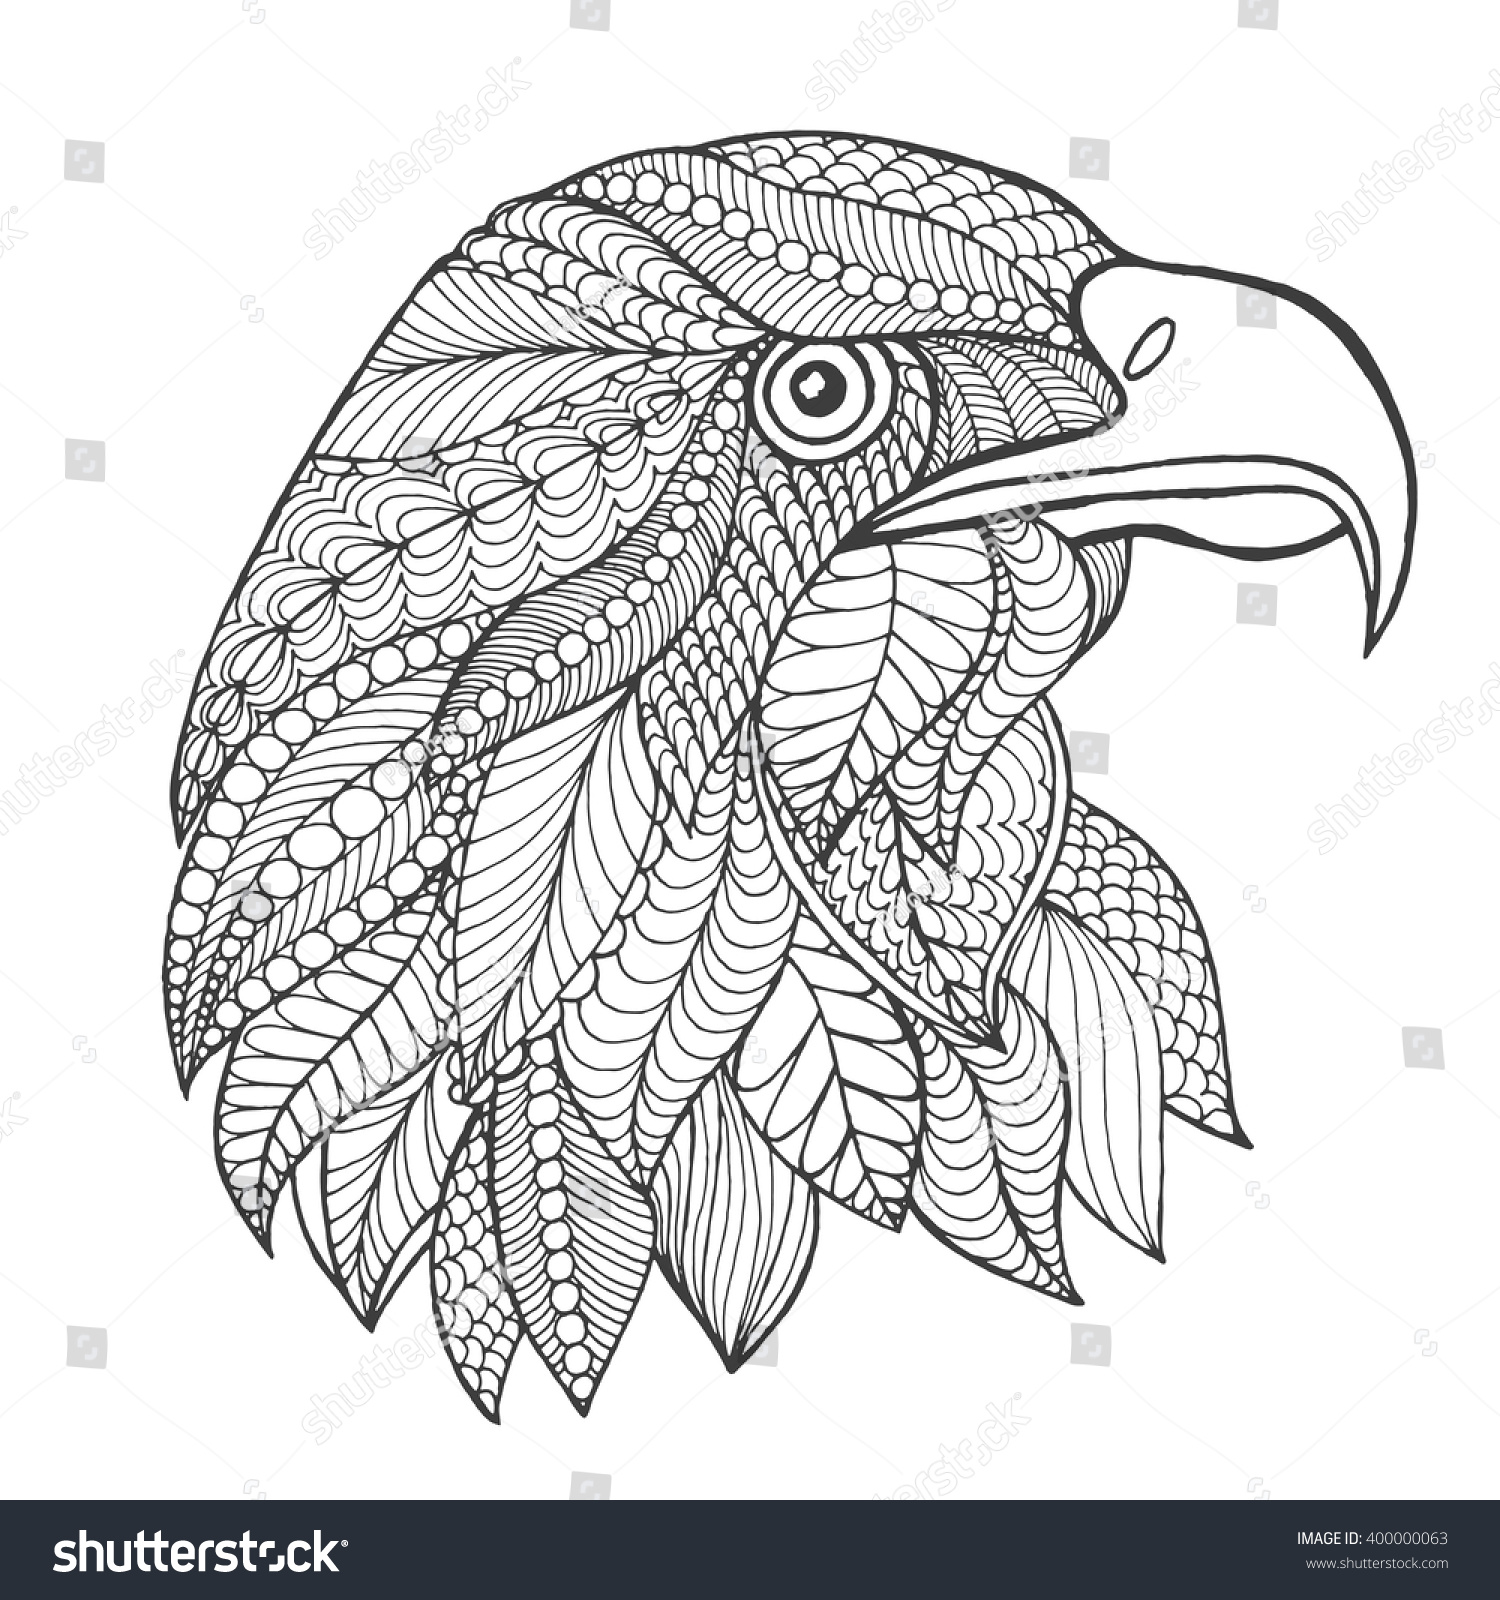 eagle coloring pages for adults - photo #48